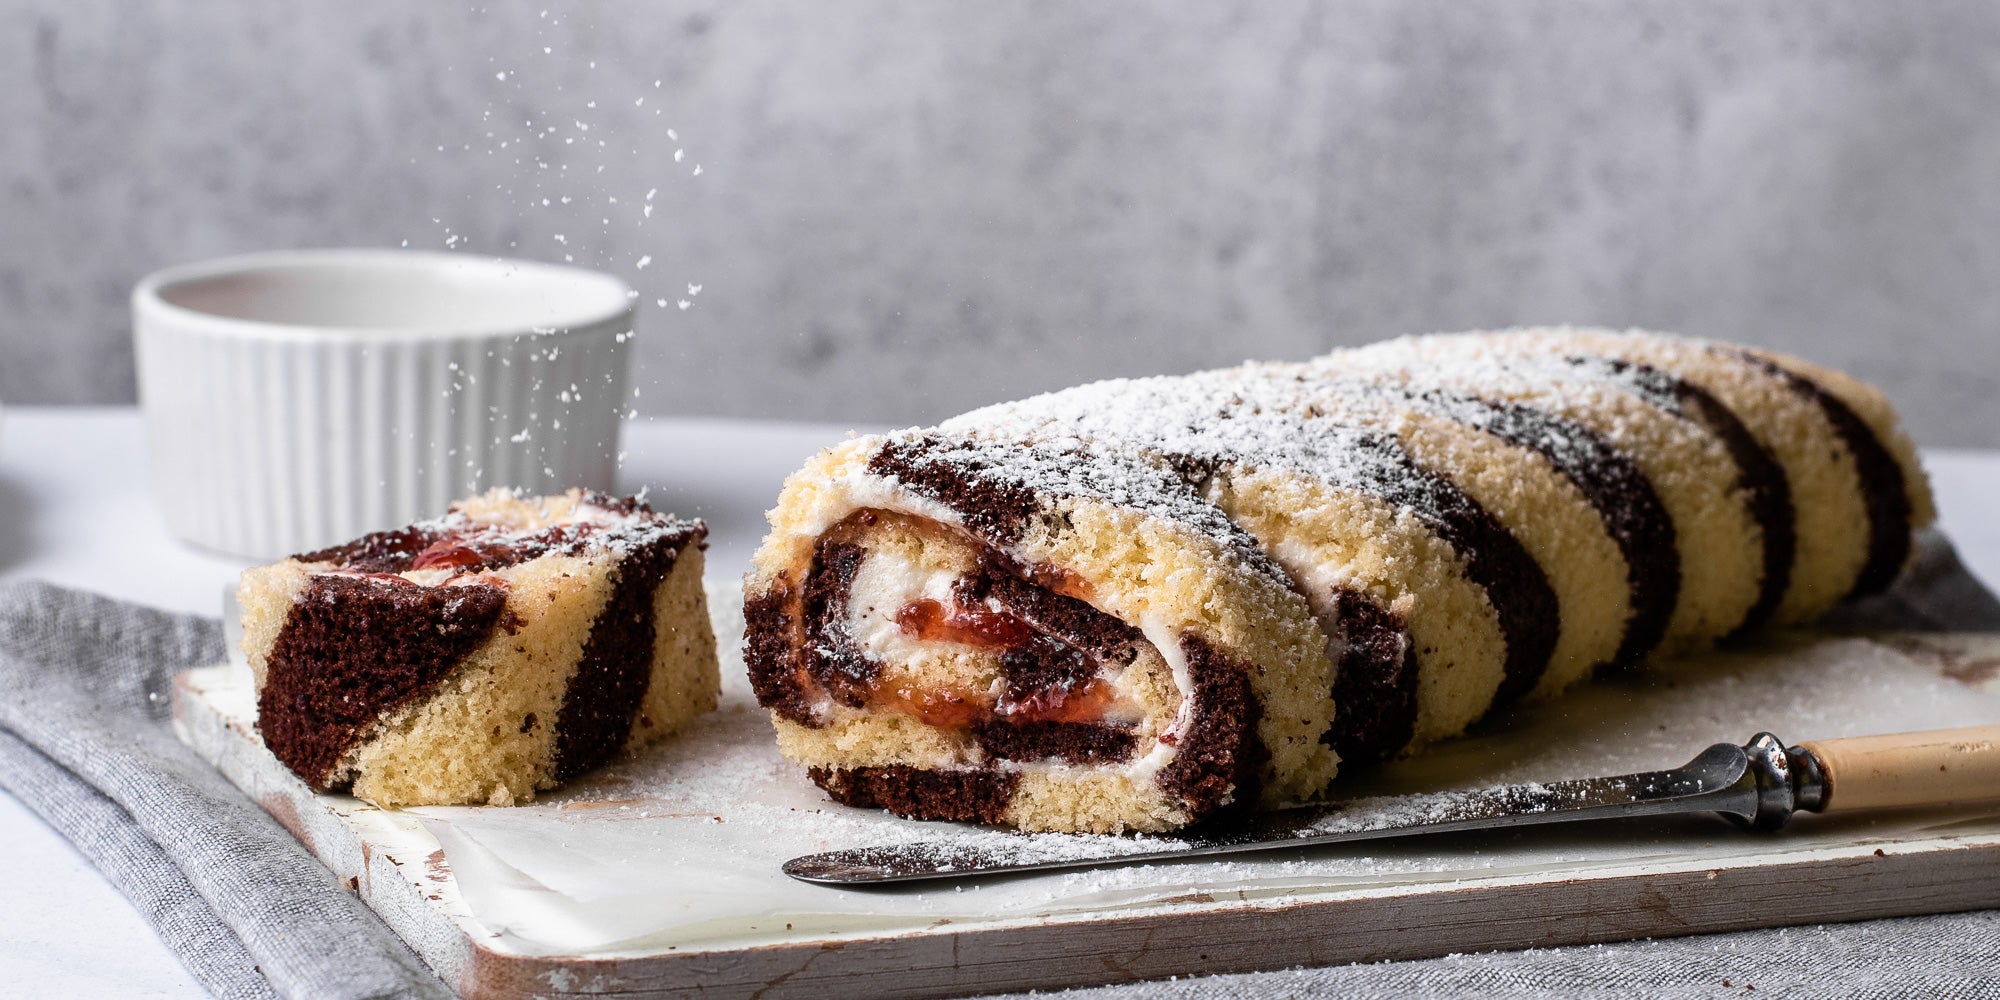 Chocolate & Vanilla Swiss Roll dusted in icing sugar, served on a wooden board